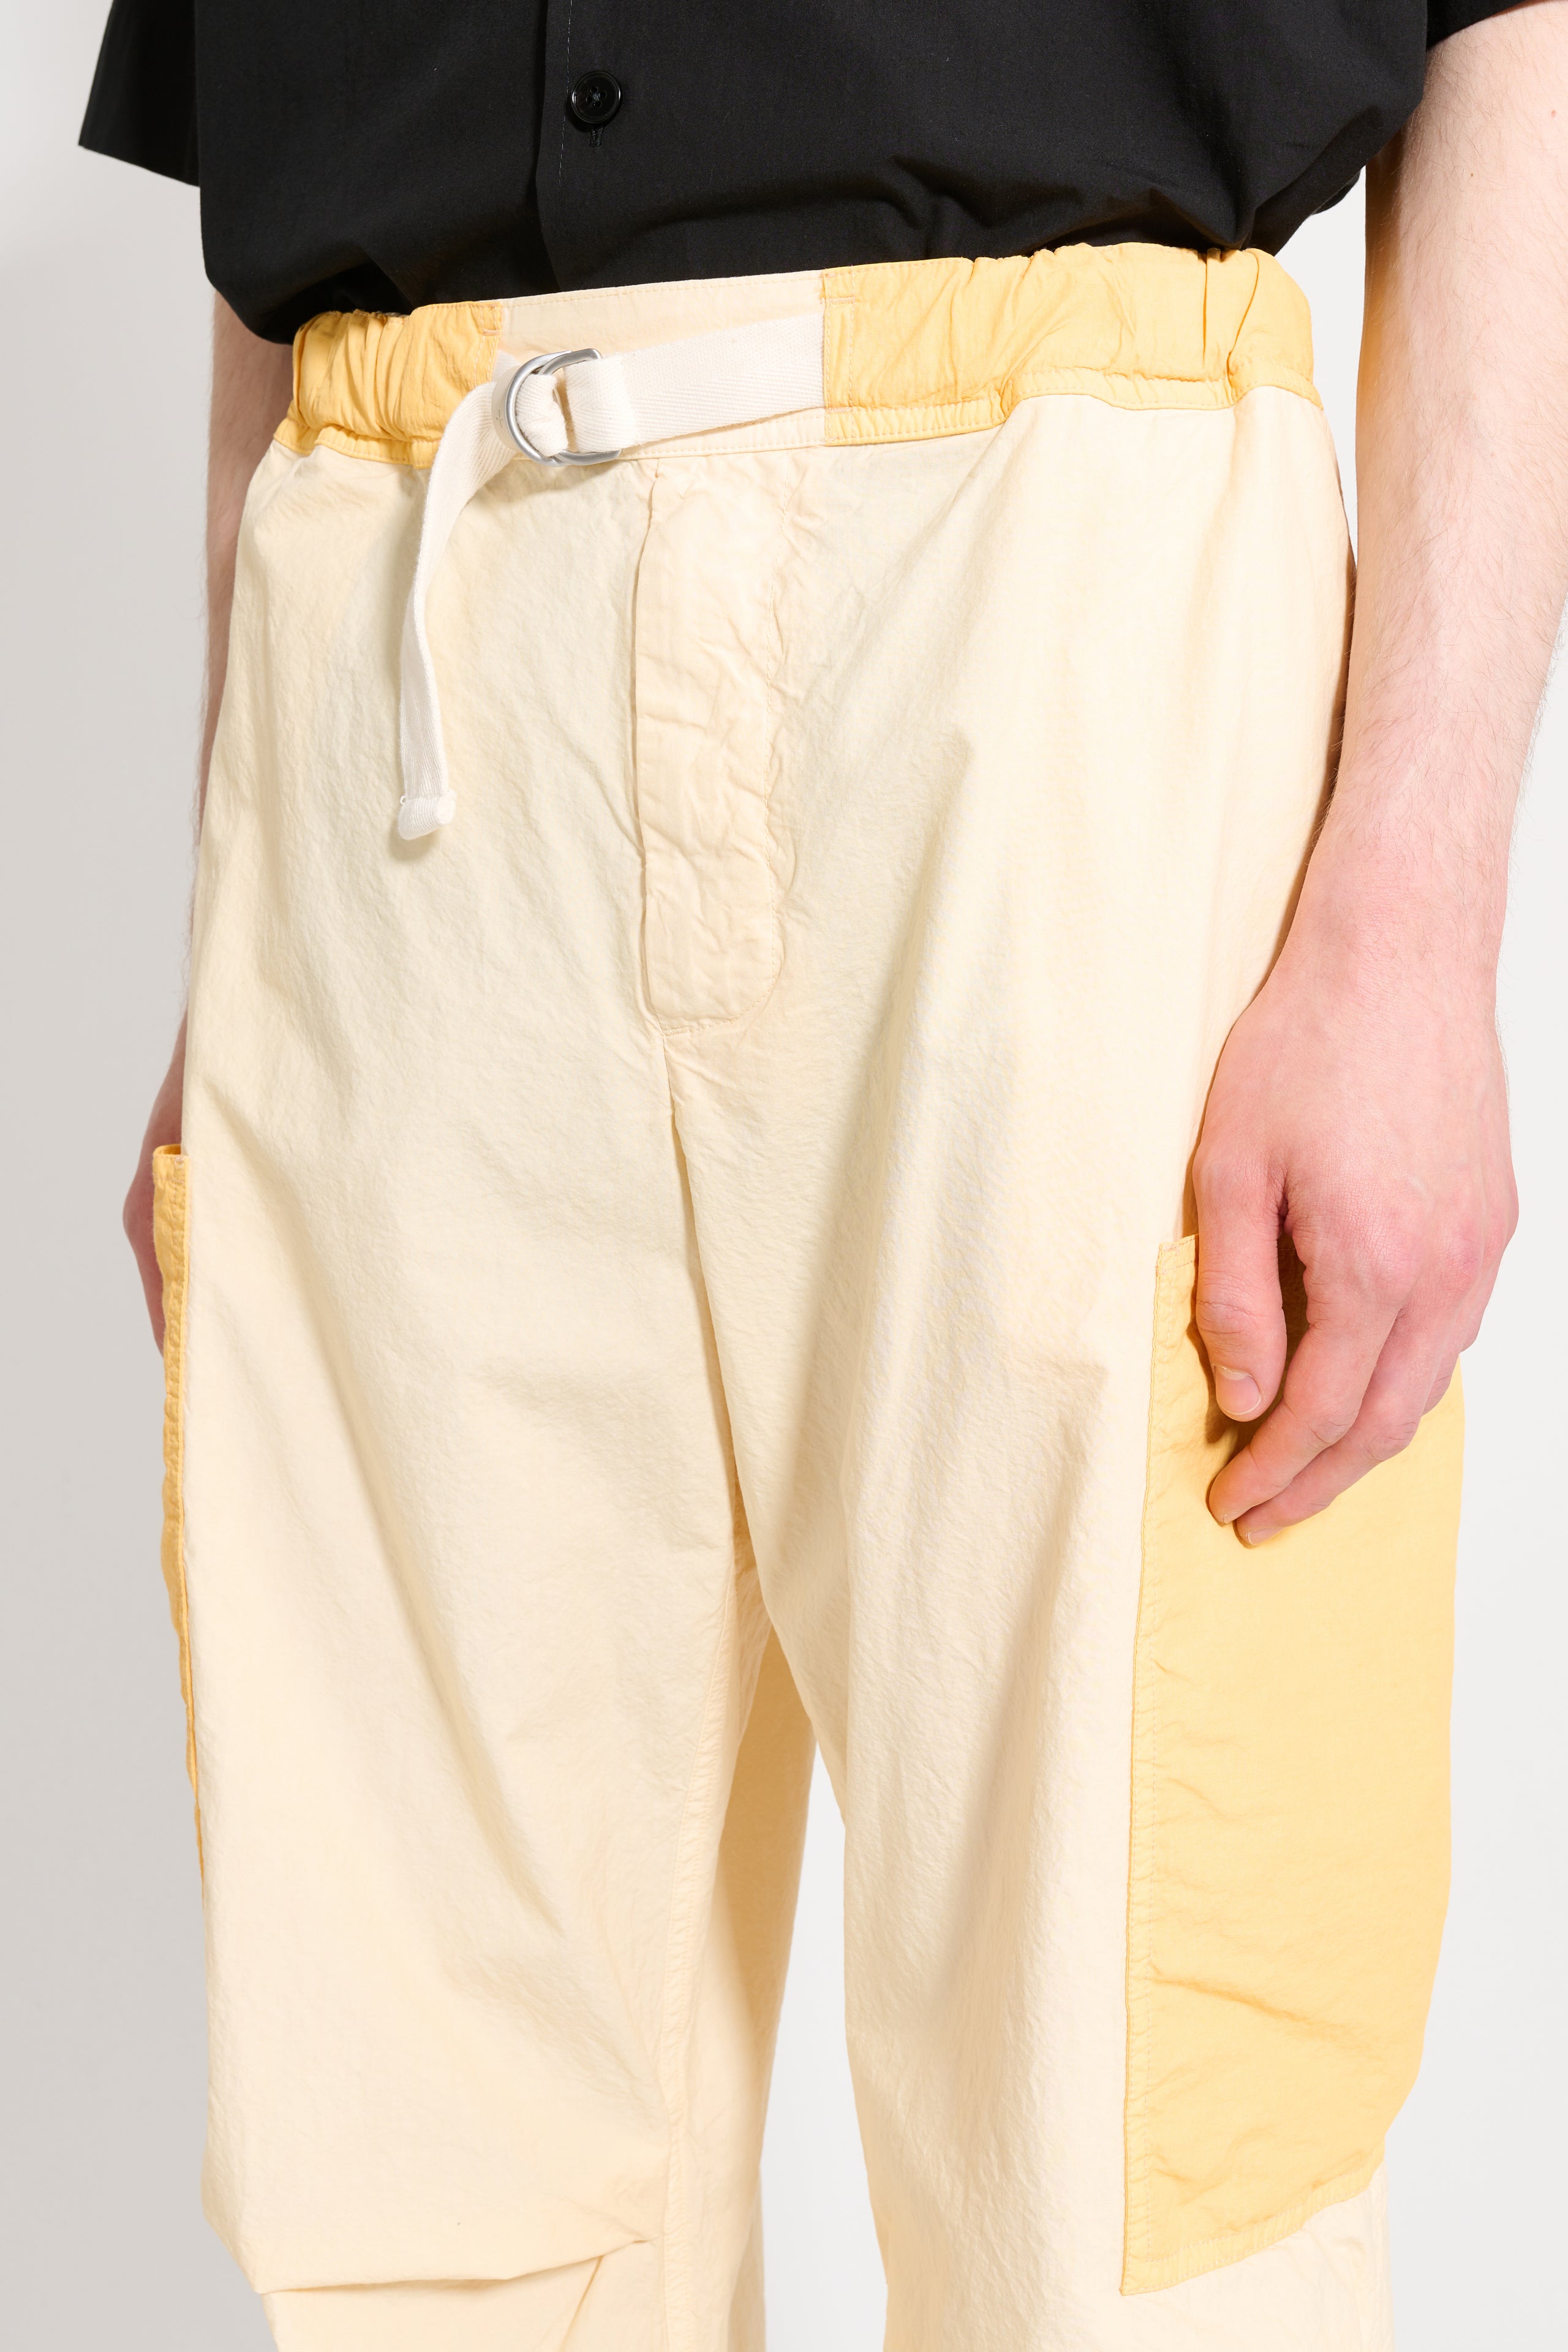 Jil Sander+ Belted Trousers Yellow